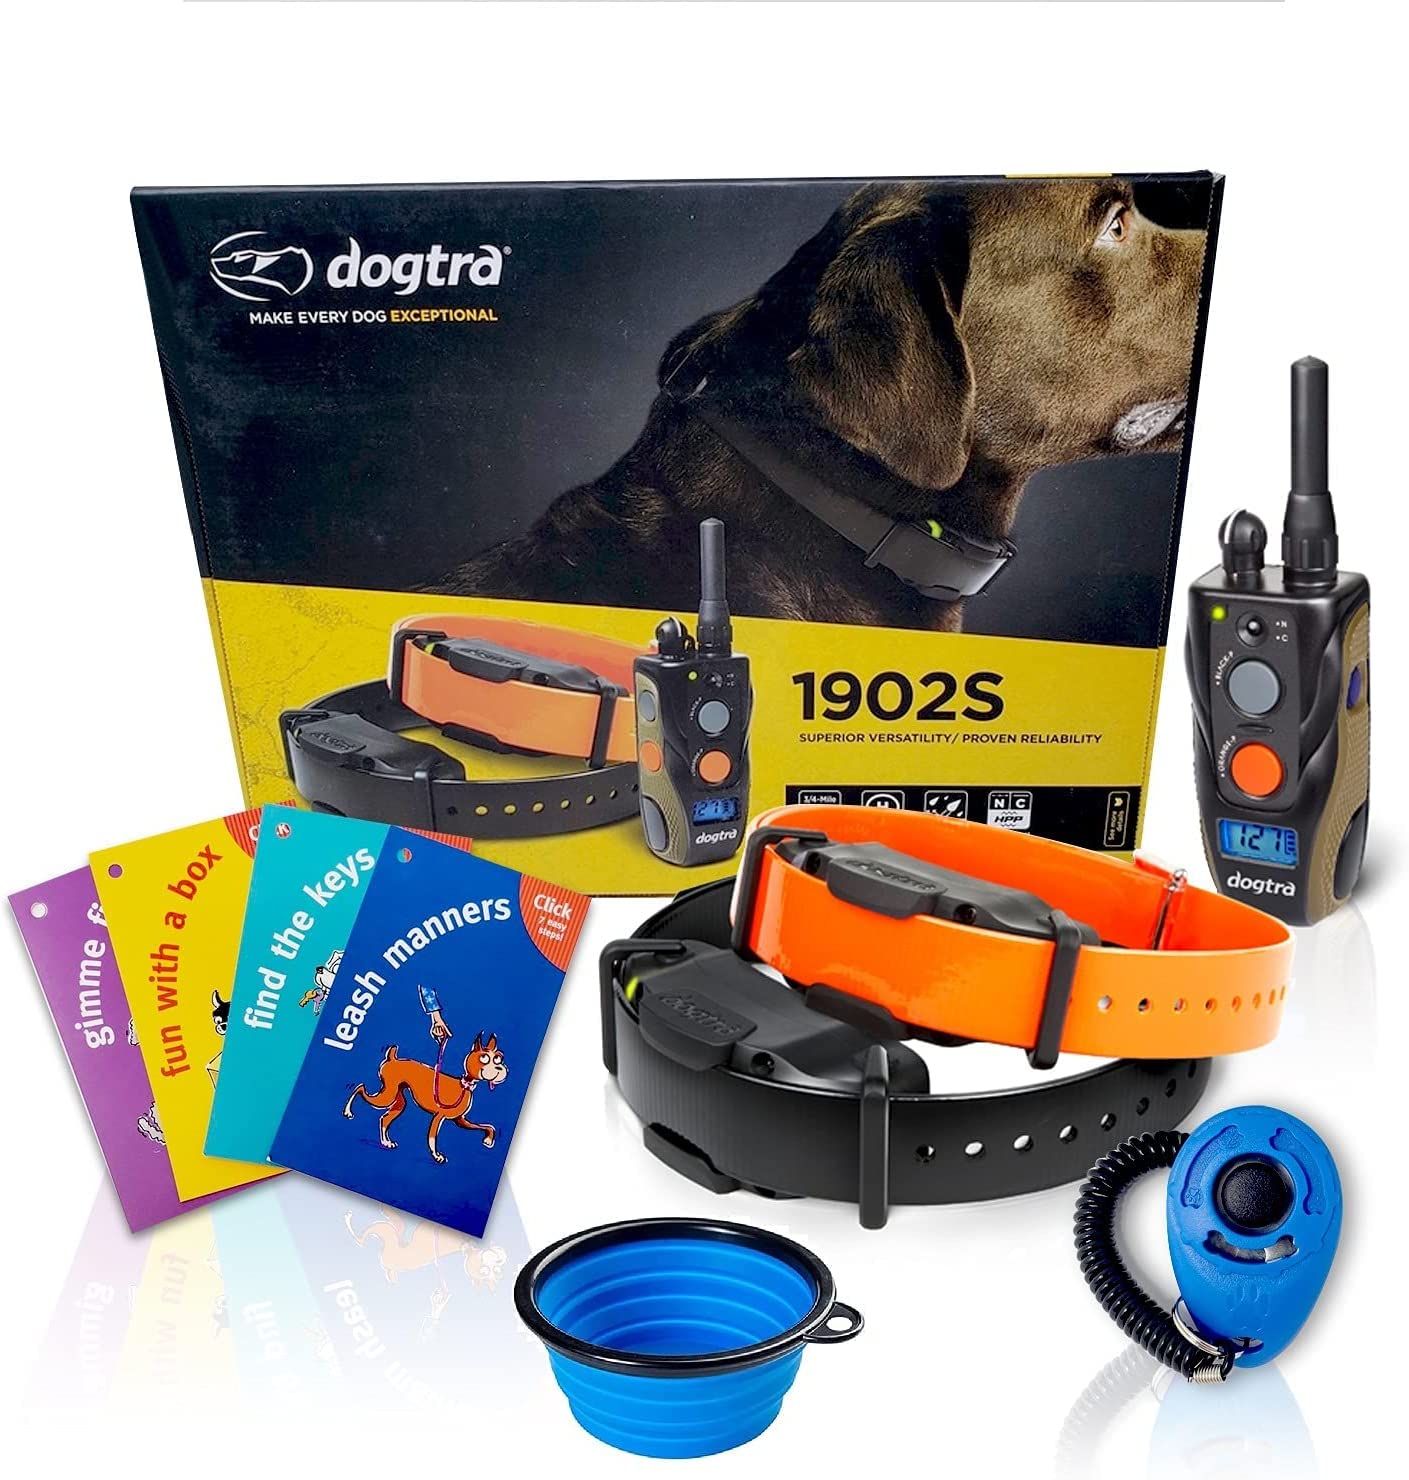 Dogtra 1902S Two Dog Remote Training Collar - 3/4 Mile Range, Rechargeable, Waterproof - Plus 1 iClick Training Card, Jestik Click Trainer - Value Bundle